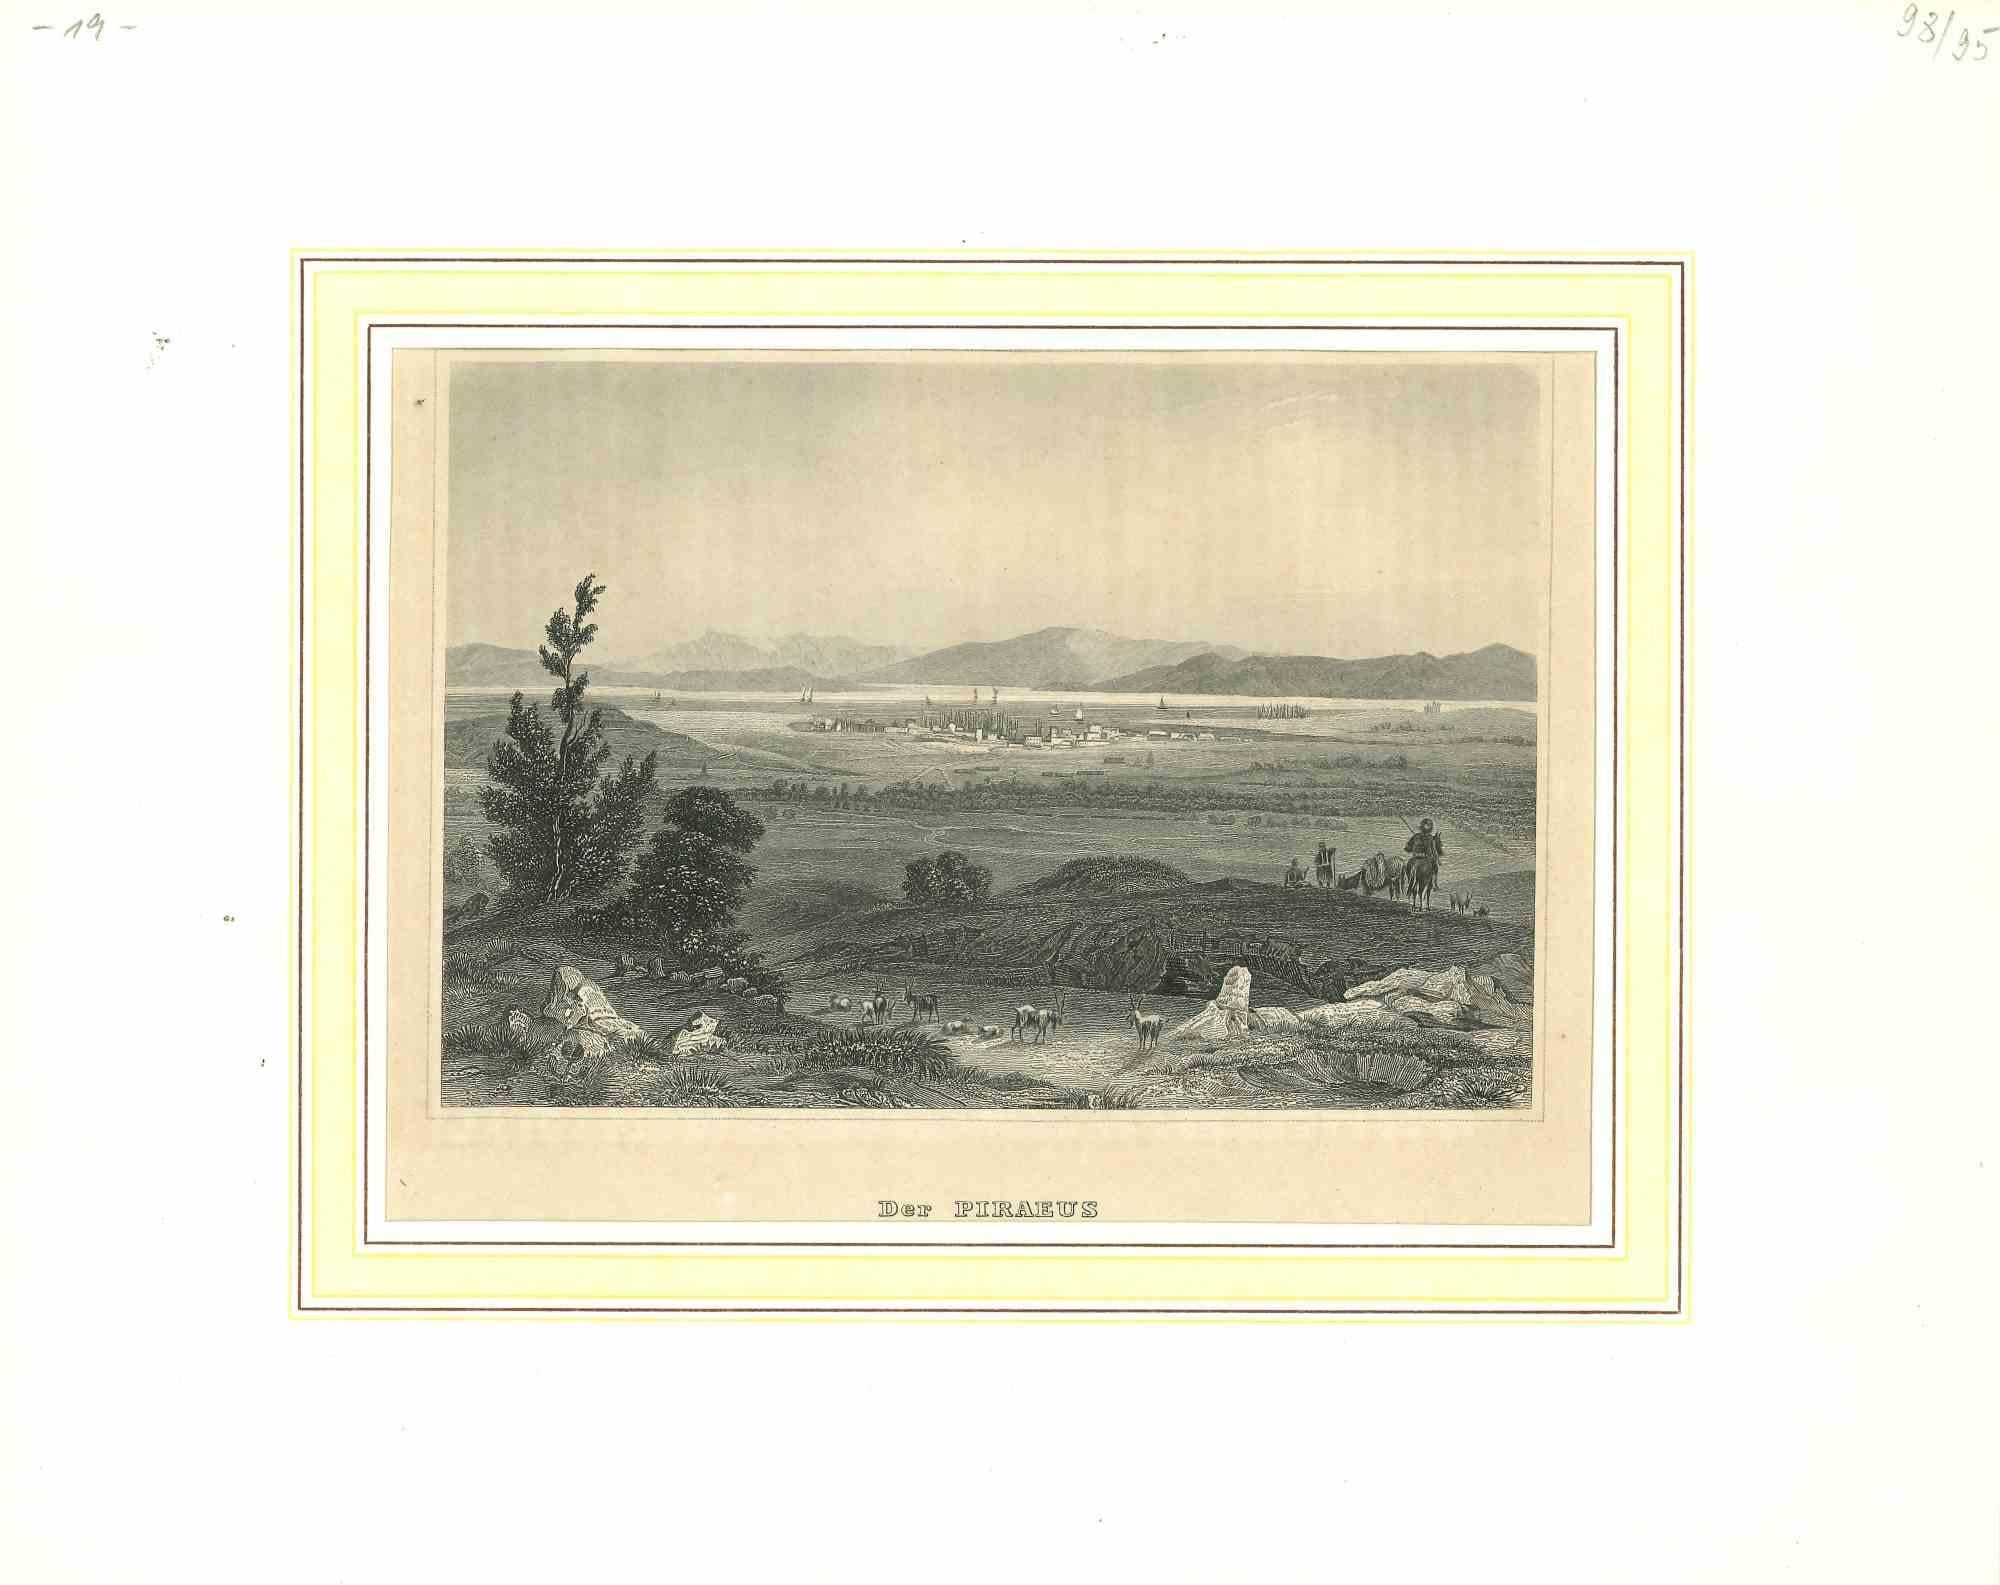 Unknown Figurative Print - Ancient View of Piraeus (Athens) - Original Lithograph - Mid-19th Century